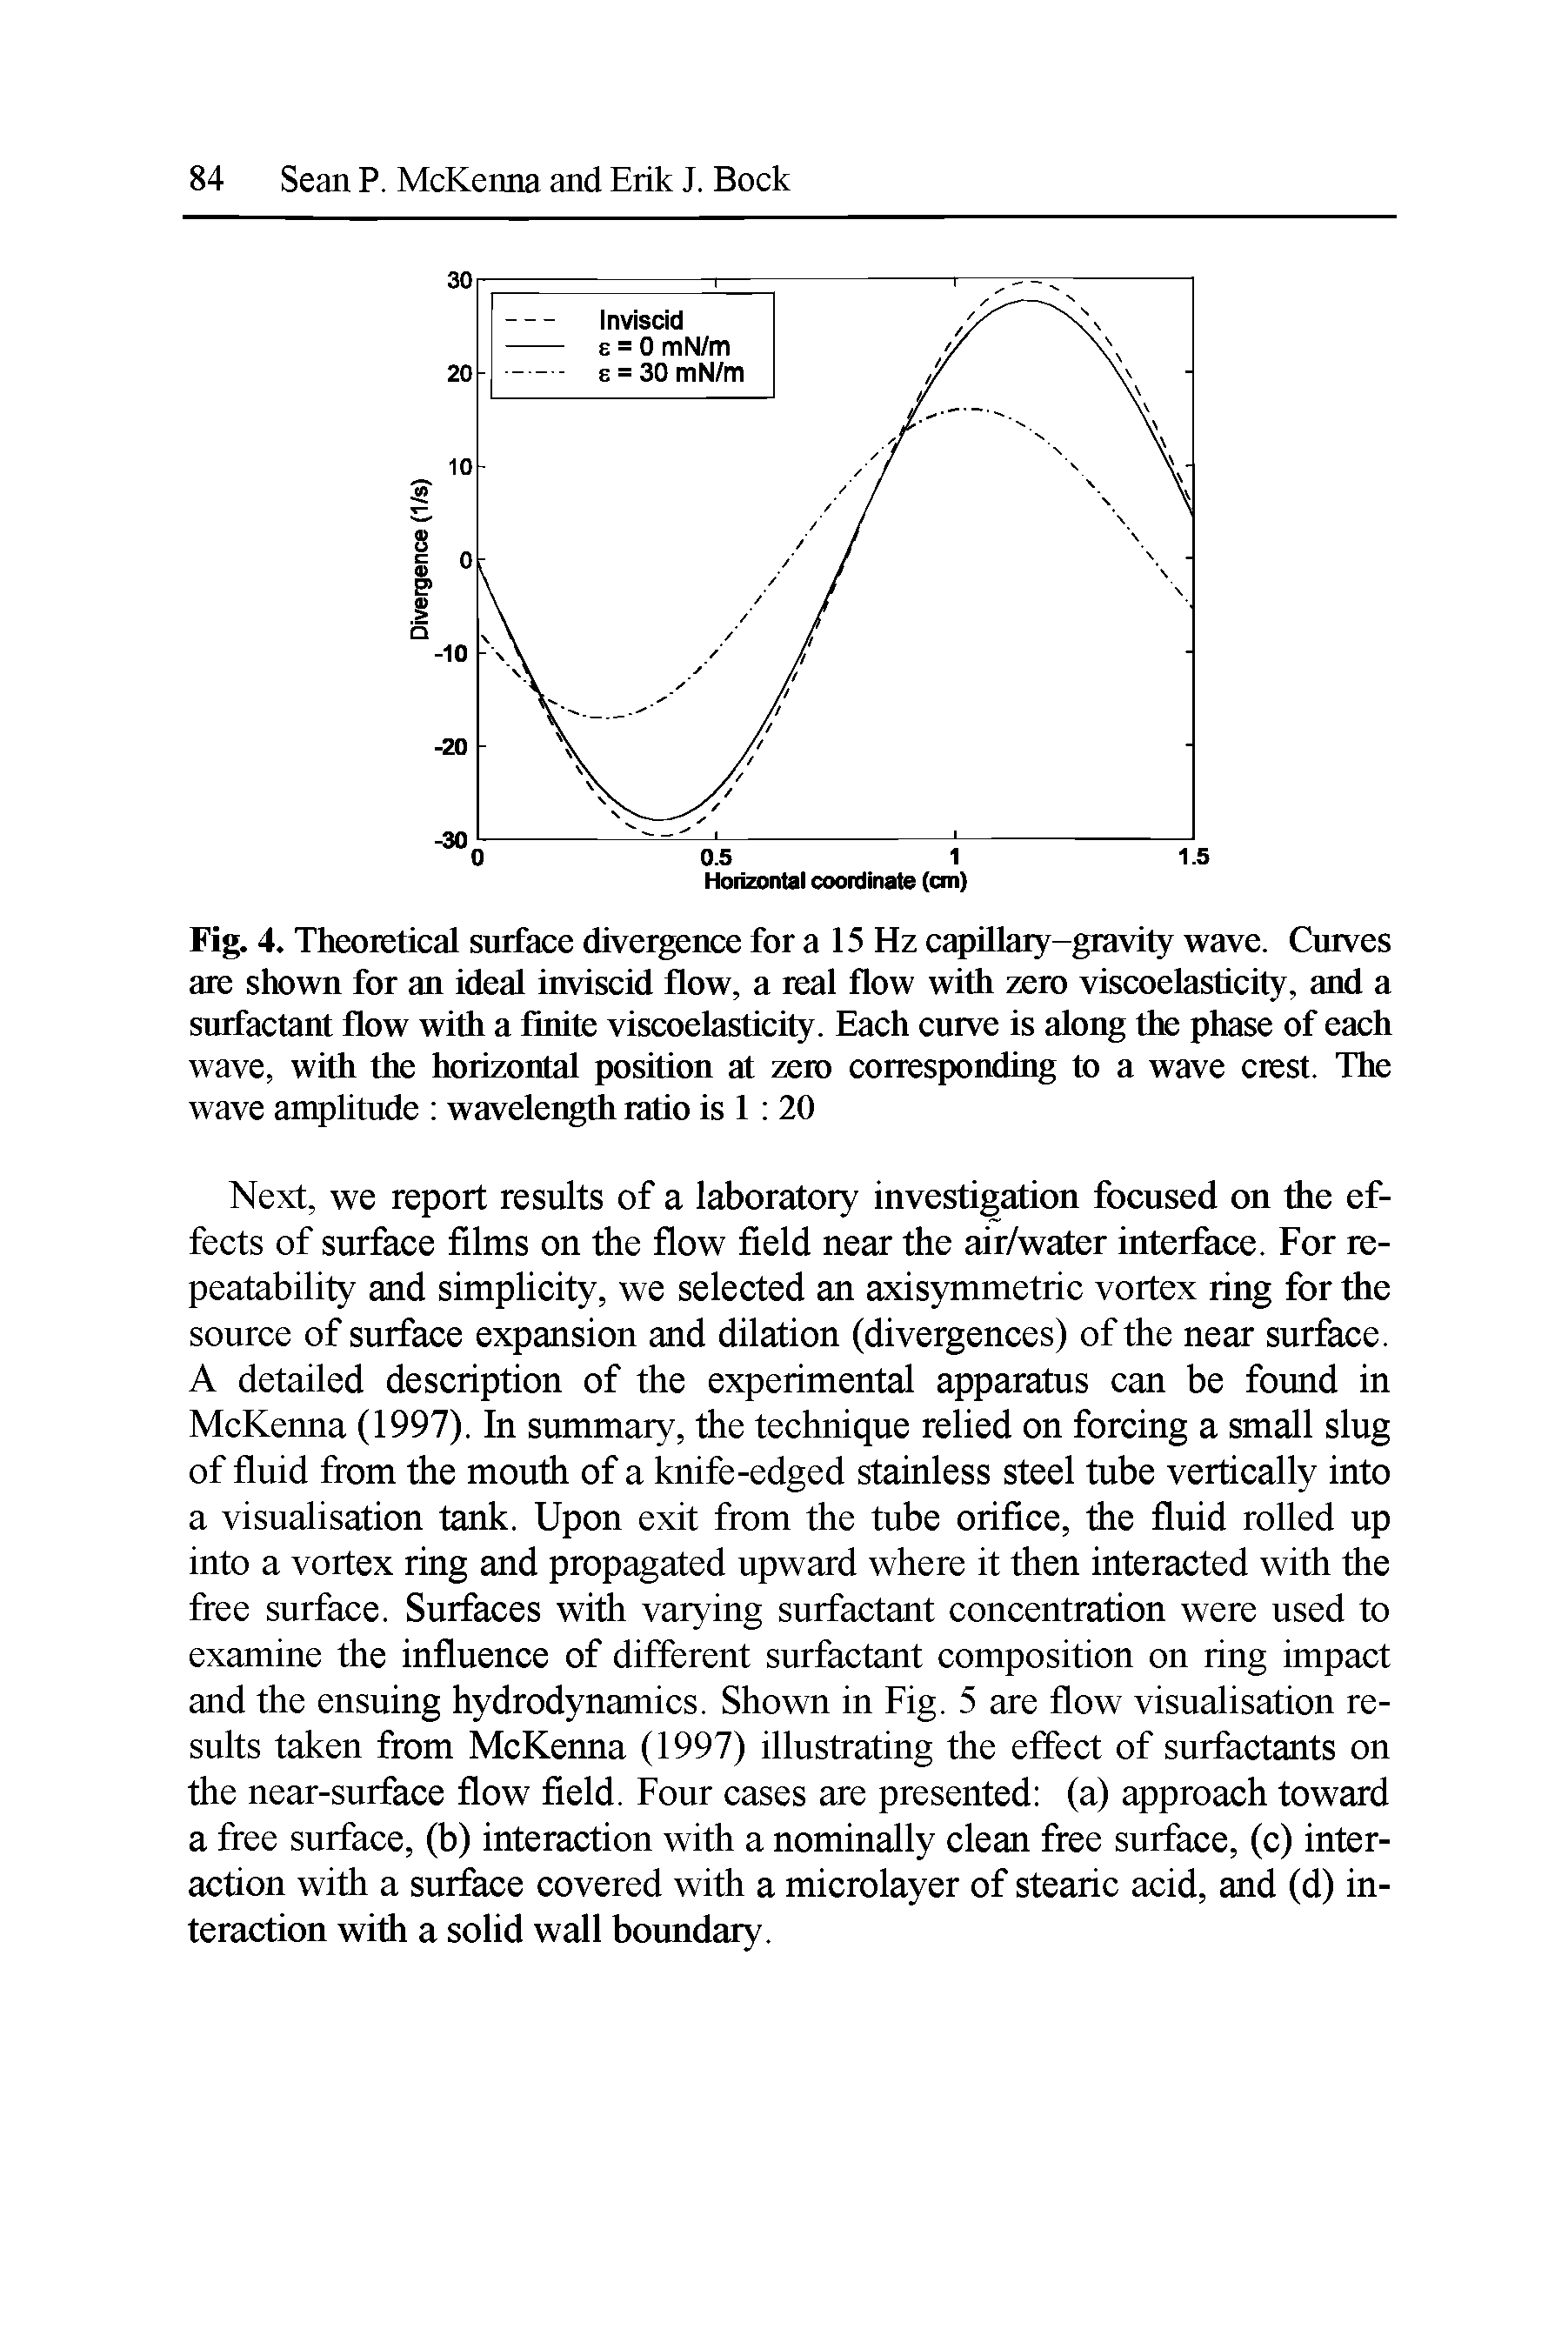 Fig. 4. Theoretical surface divergence for a 15 Hz capillary-gravity wave. Curves are shown for an ideal inviscid flow, a real flow with zero viscoelasticity, and a surfactant flow with a finite viscoelasticity. Each curve is along the phase of each wave, with the horizontal position at zero corresponding to a wave crest. The wave amplitude wavelength ratio is 1 20...